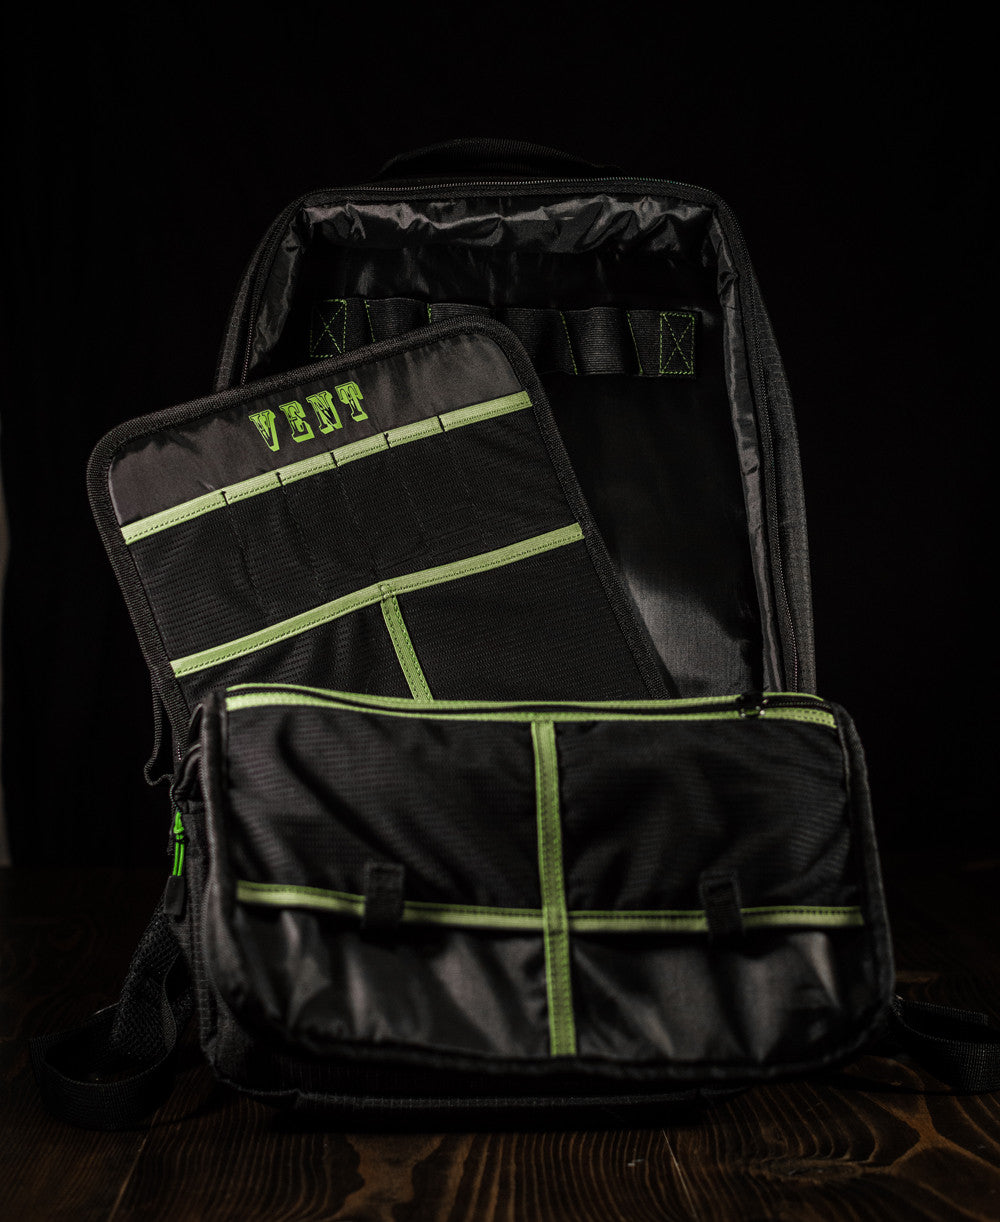 V2 Backpack! 3 Days only, receive 60% OFF @ Checkout! (FREE SHIPPING TO THE LOWER 48)